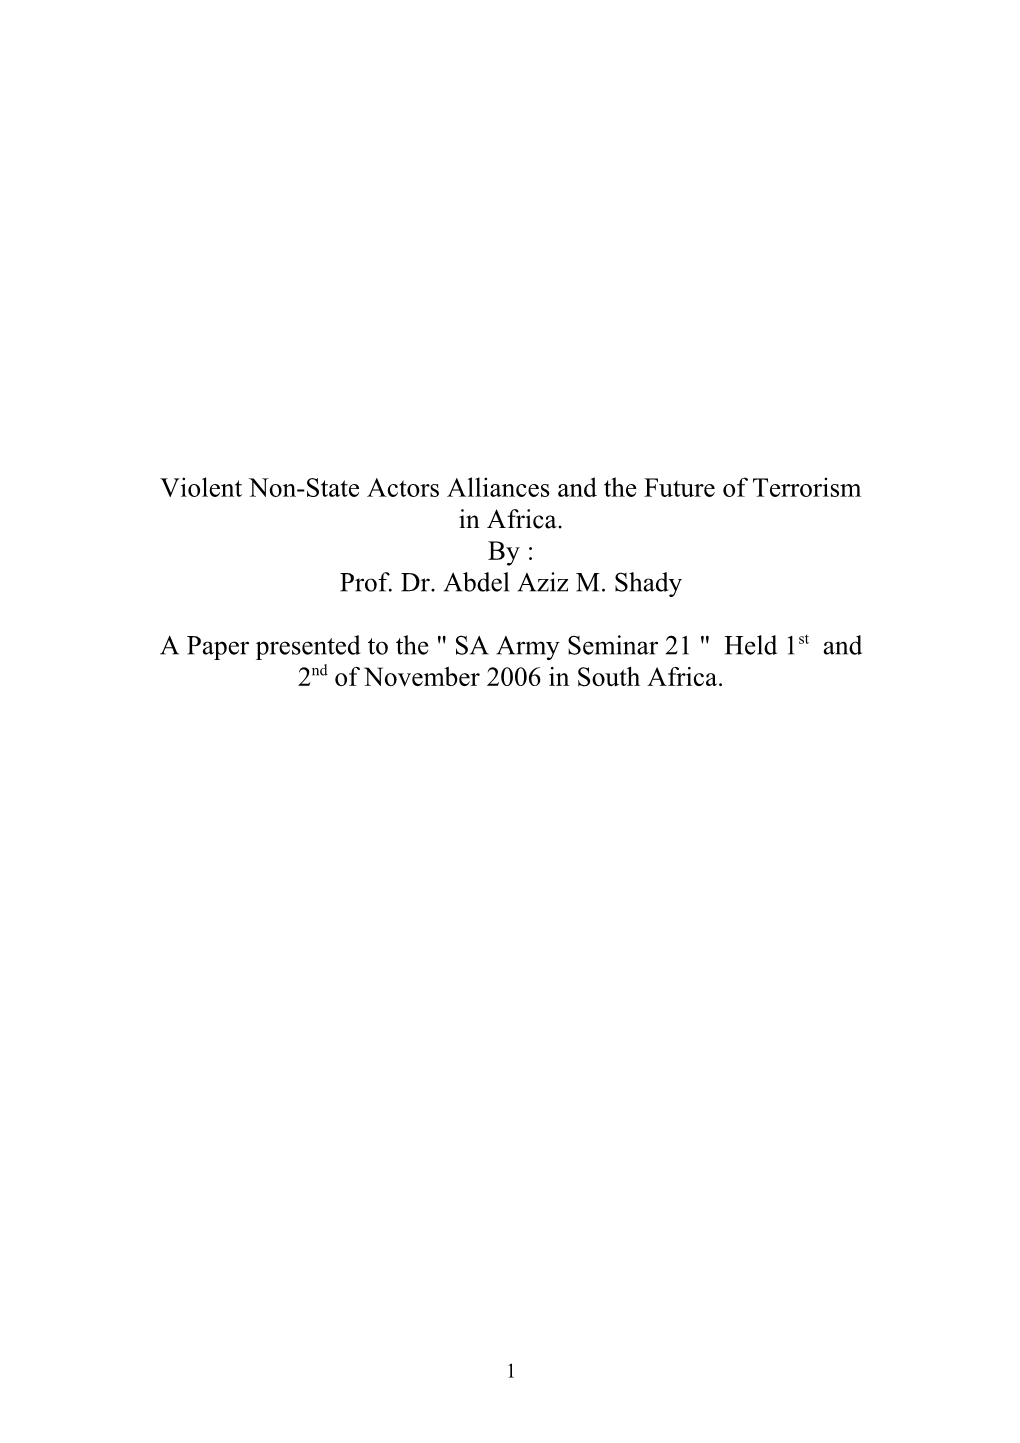 Violent Non-State Actors Alliances and the Future of Terrorism in Africa